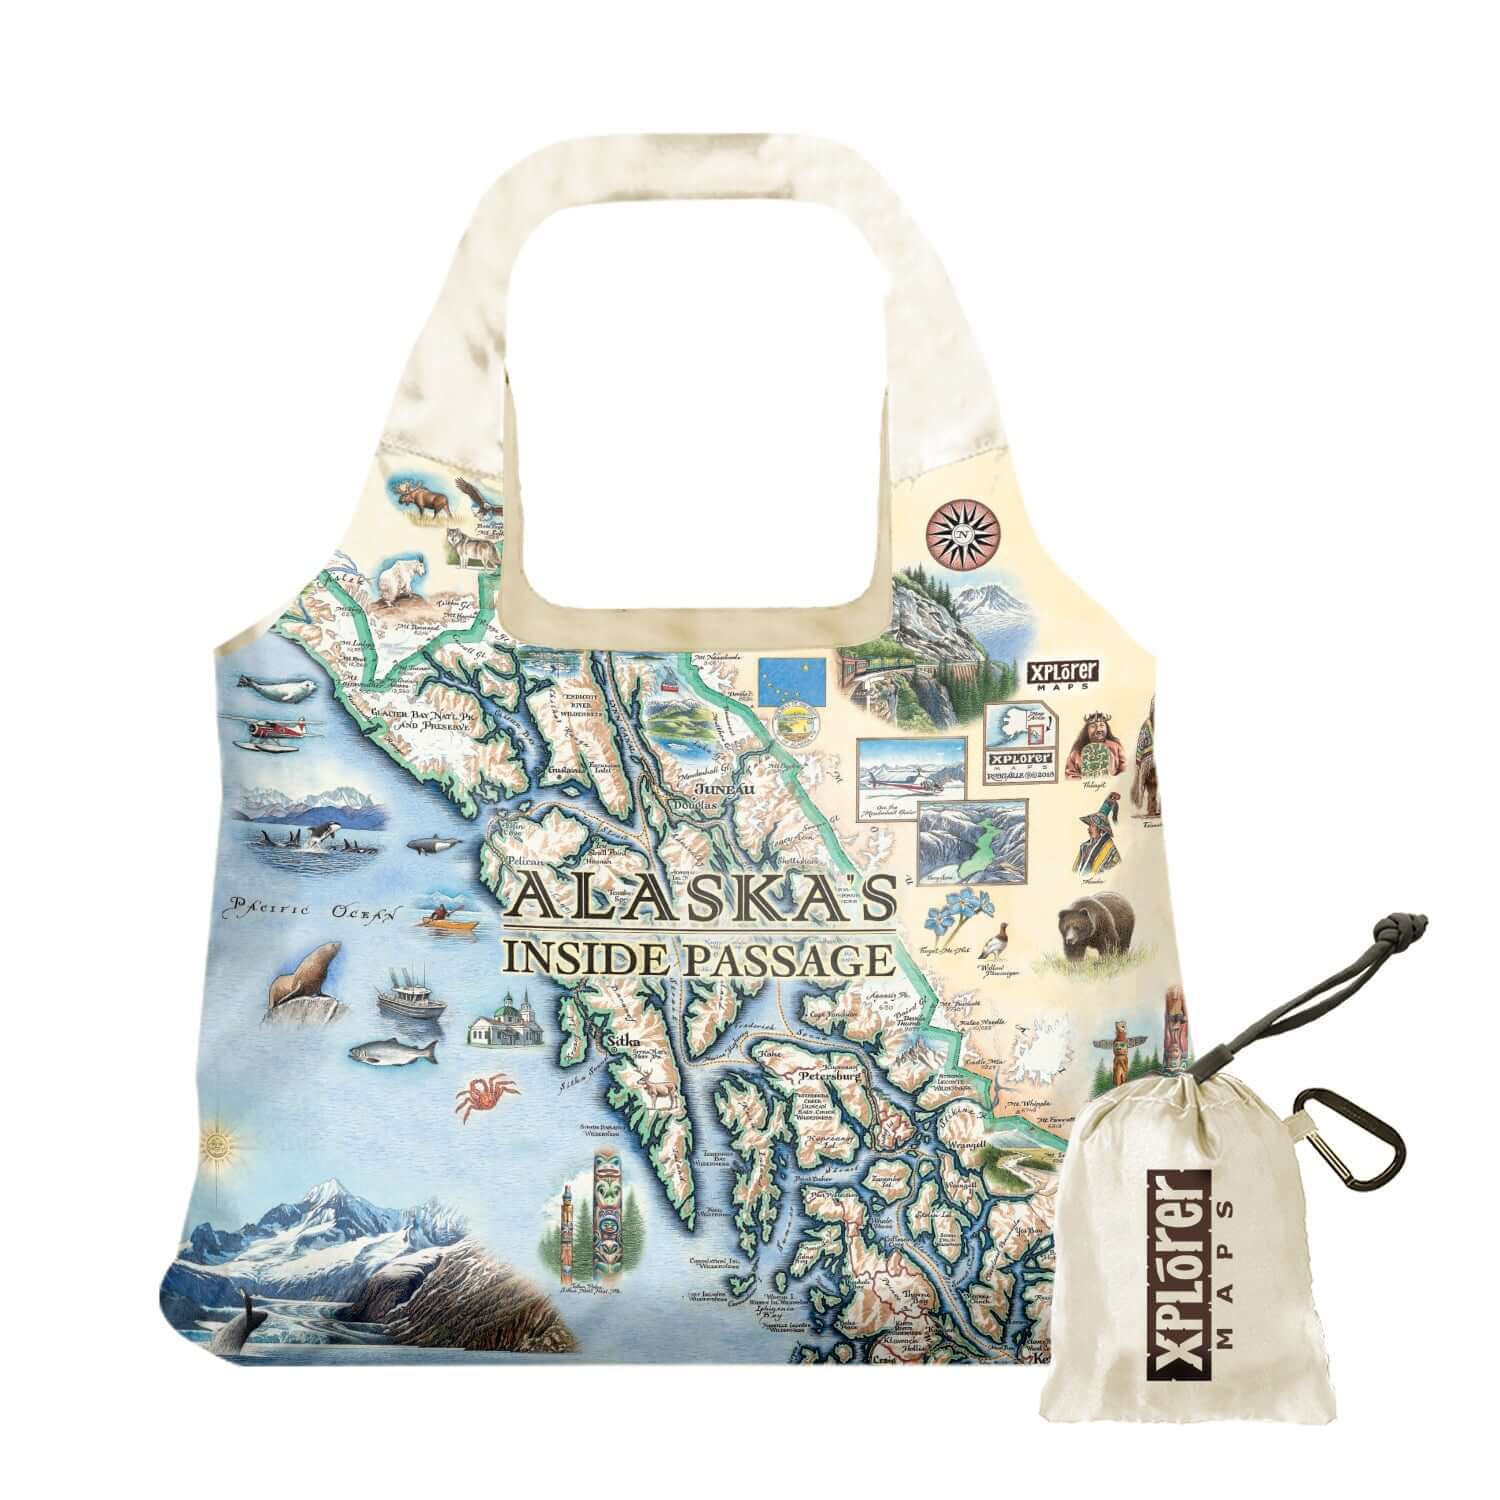 Alaska's Inside Passage Stuffable Pouch Tote Bag in earth tone colors - featuring bears, whale, mountain goat & sheep.